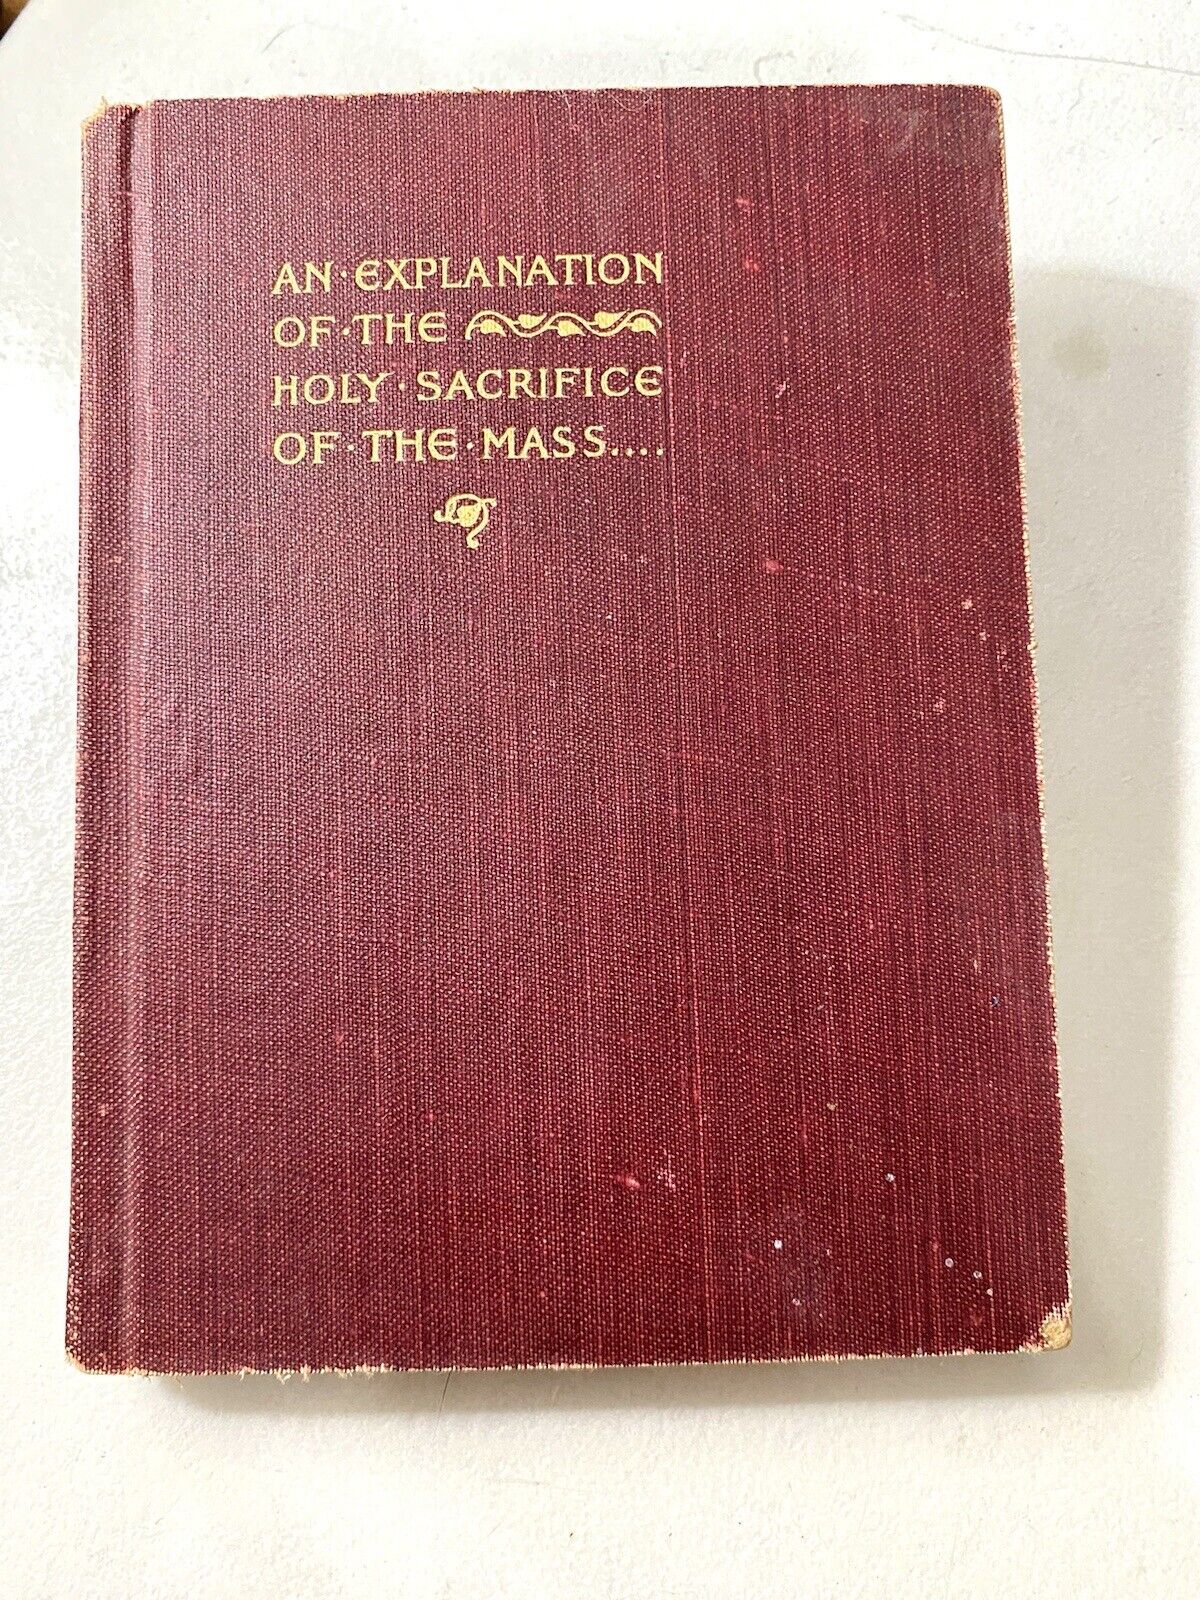 1902 An Explanation of the Holy Sacrifice of the Mass Rev Howley Book Hardcover